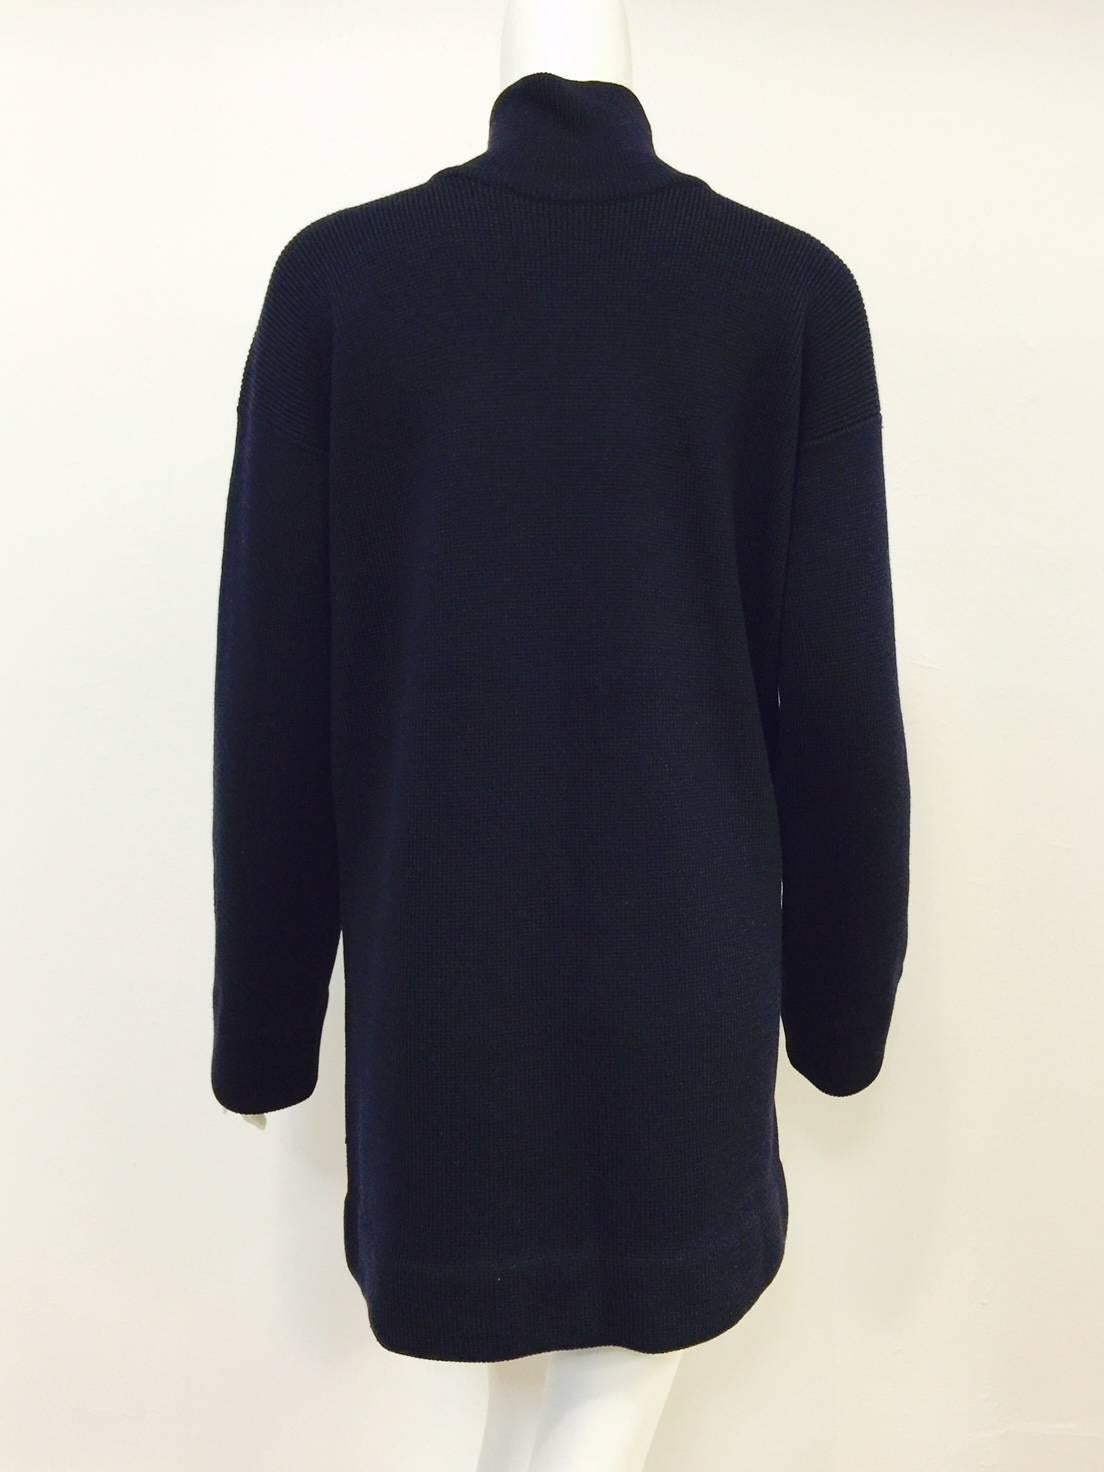 Chanel Navy Blue Wool Varsity Pullover Sweater Dress With Ivory Logo Patch In Excellent Condition For Sale In Palm Beach, FL